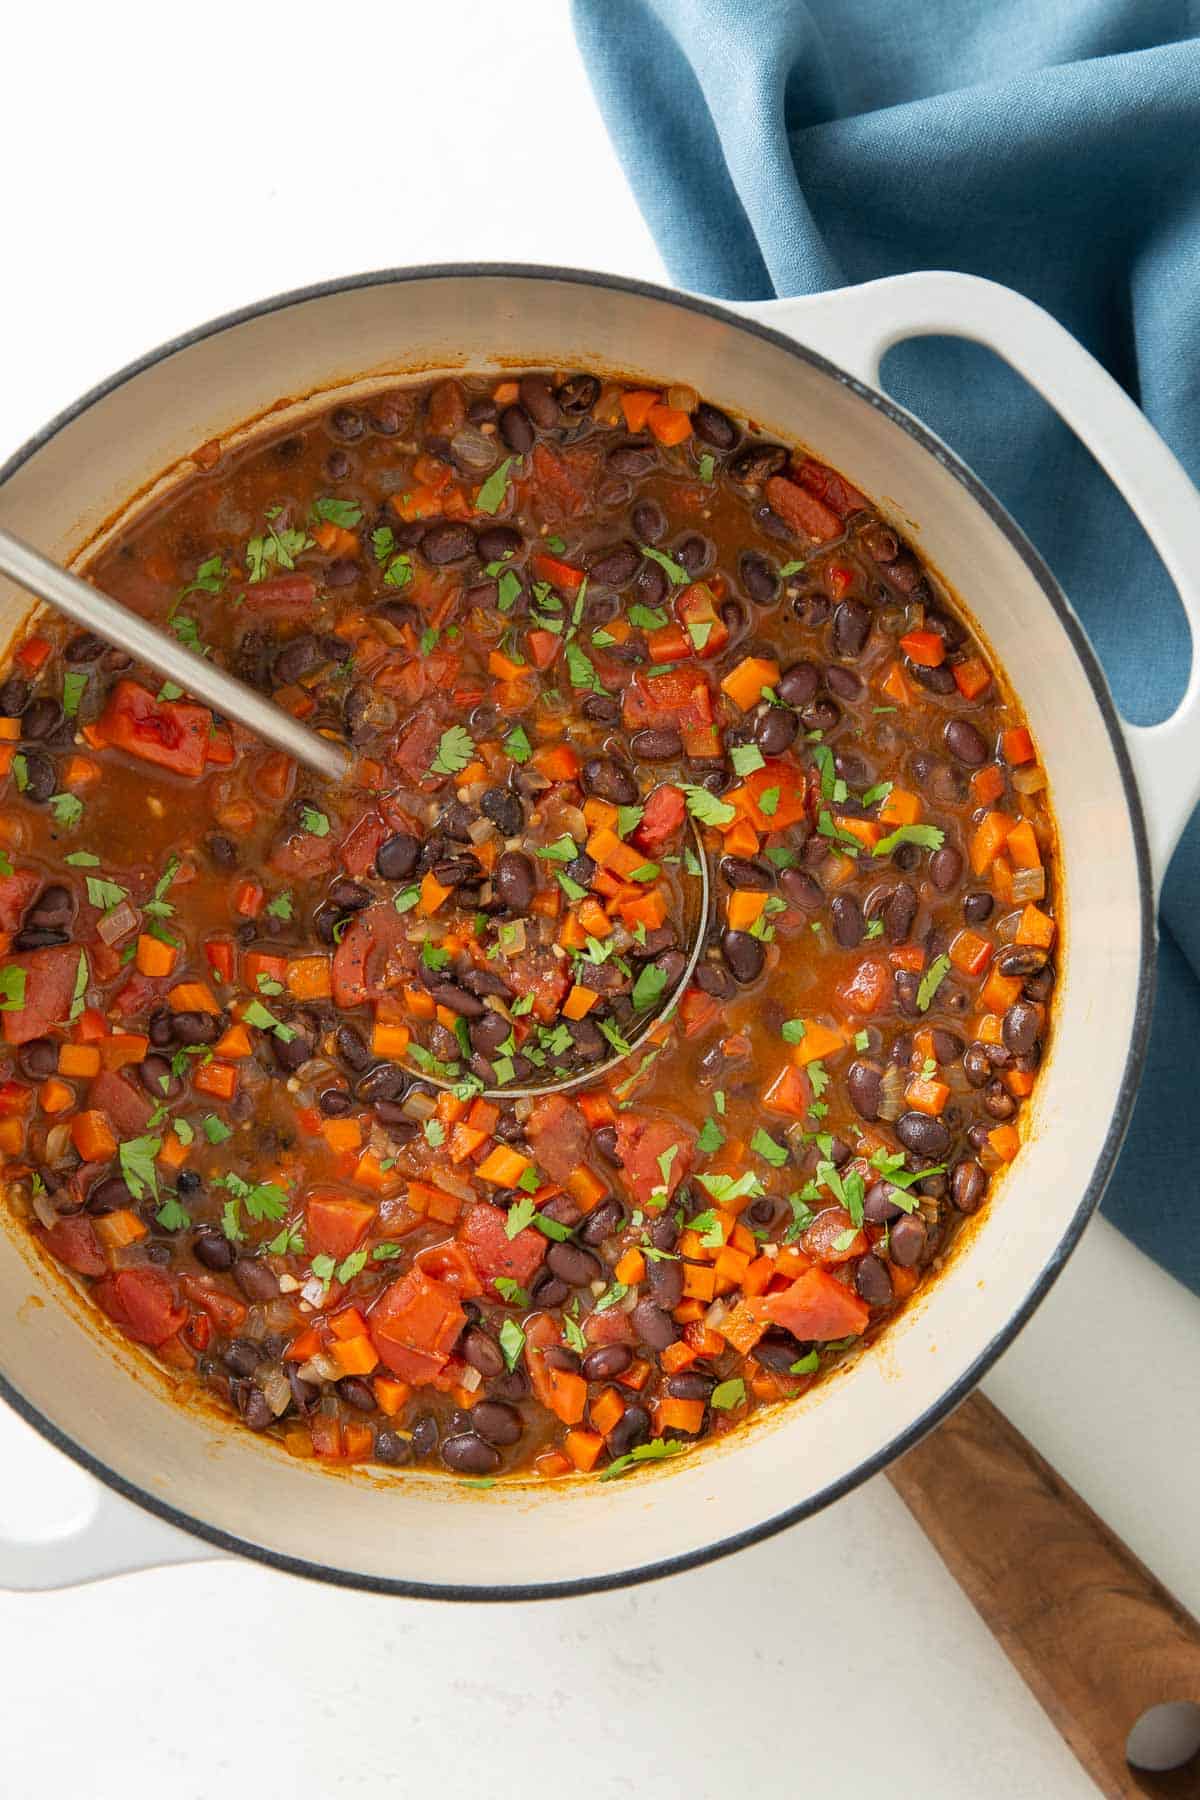 Overhead view of a pot of black bean soup with a ladle.